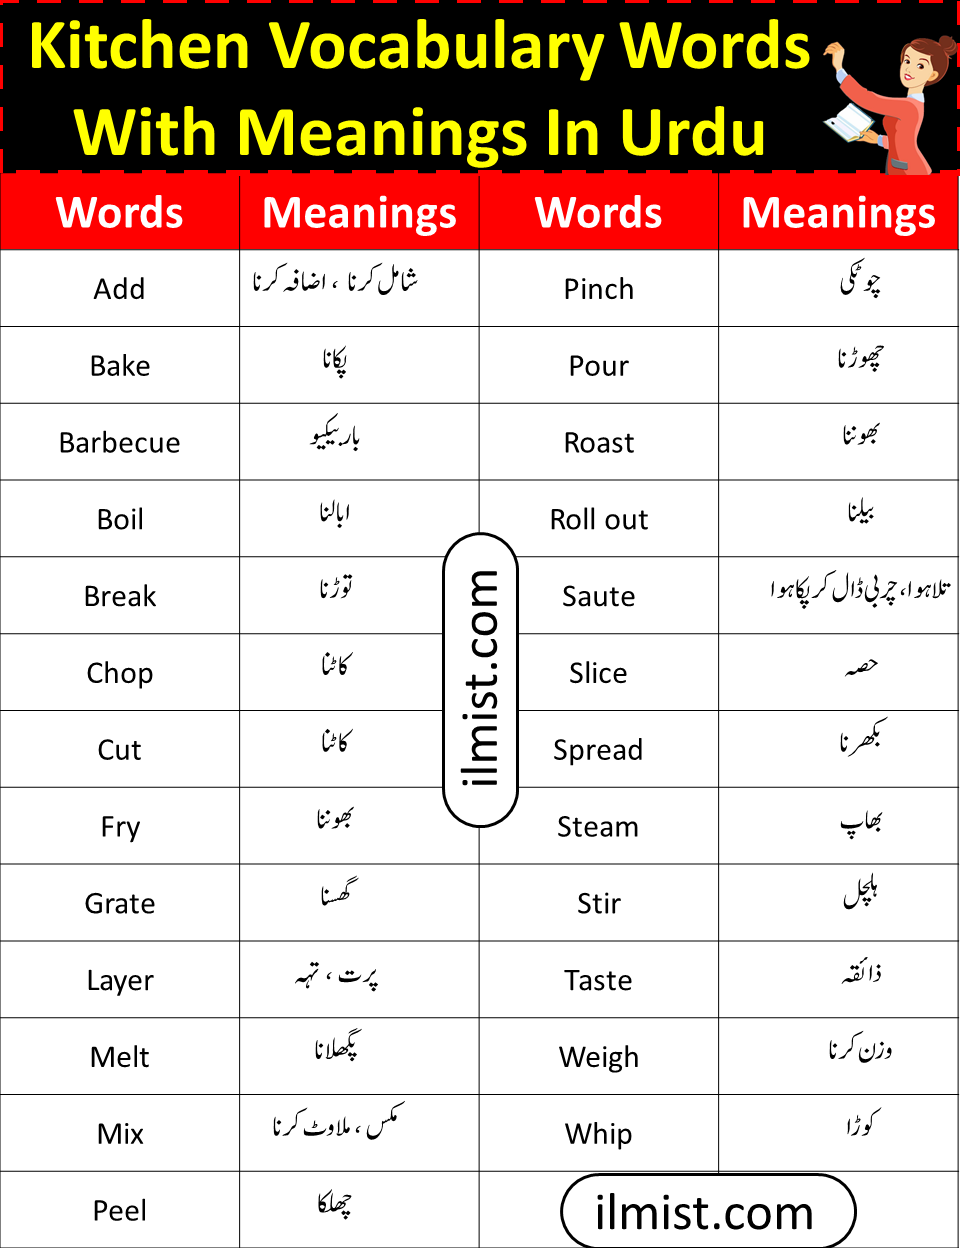 Kitchen Vocabulary Words List In English With Urdu Meanings